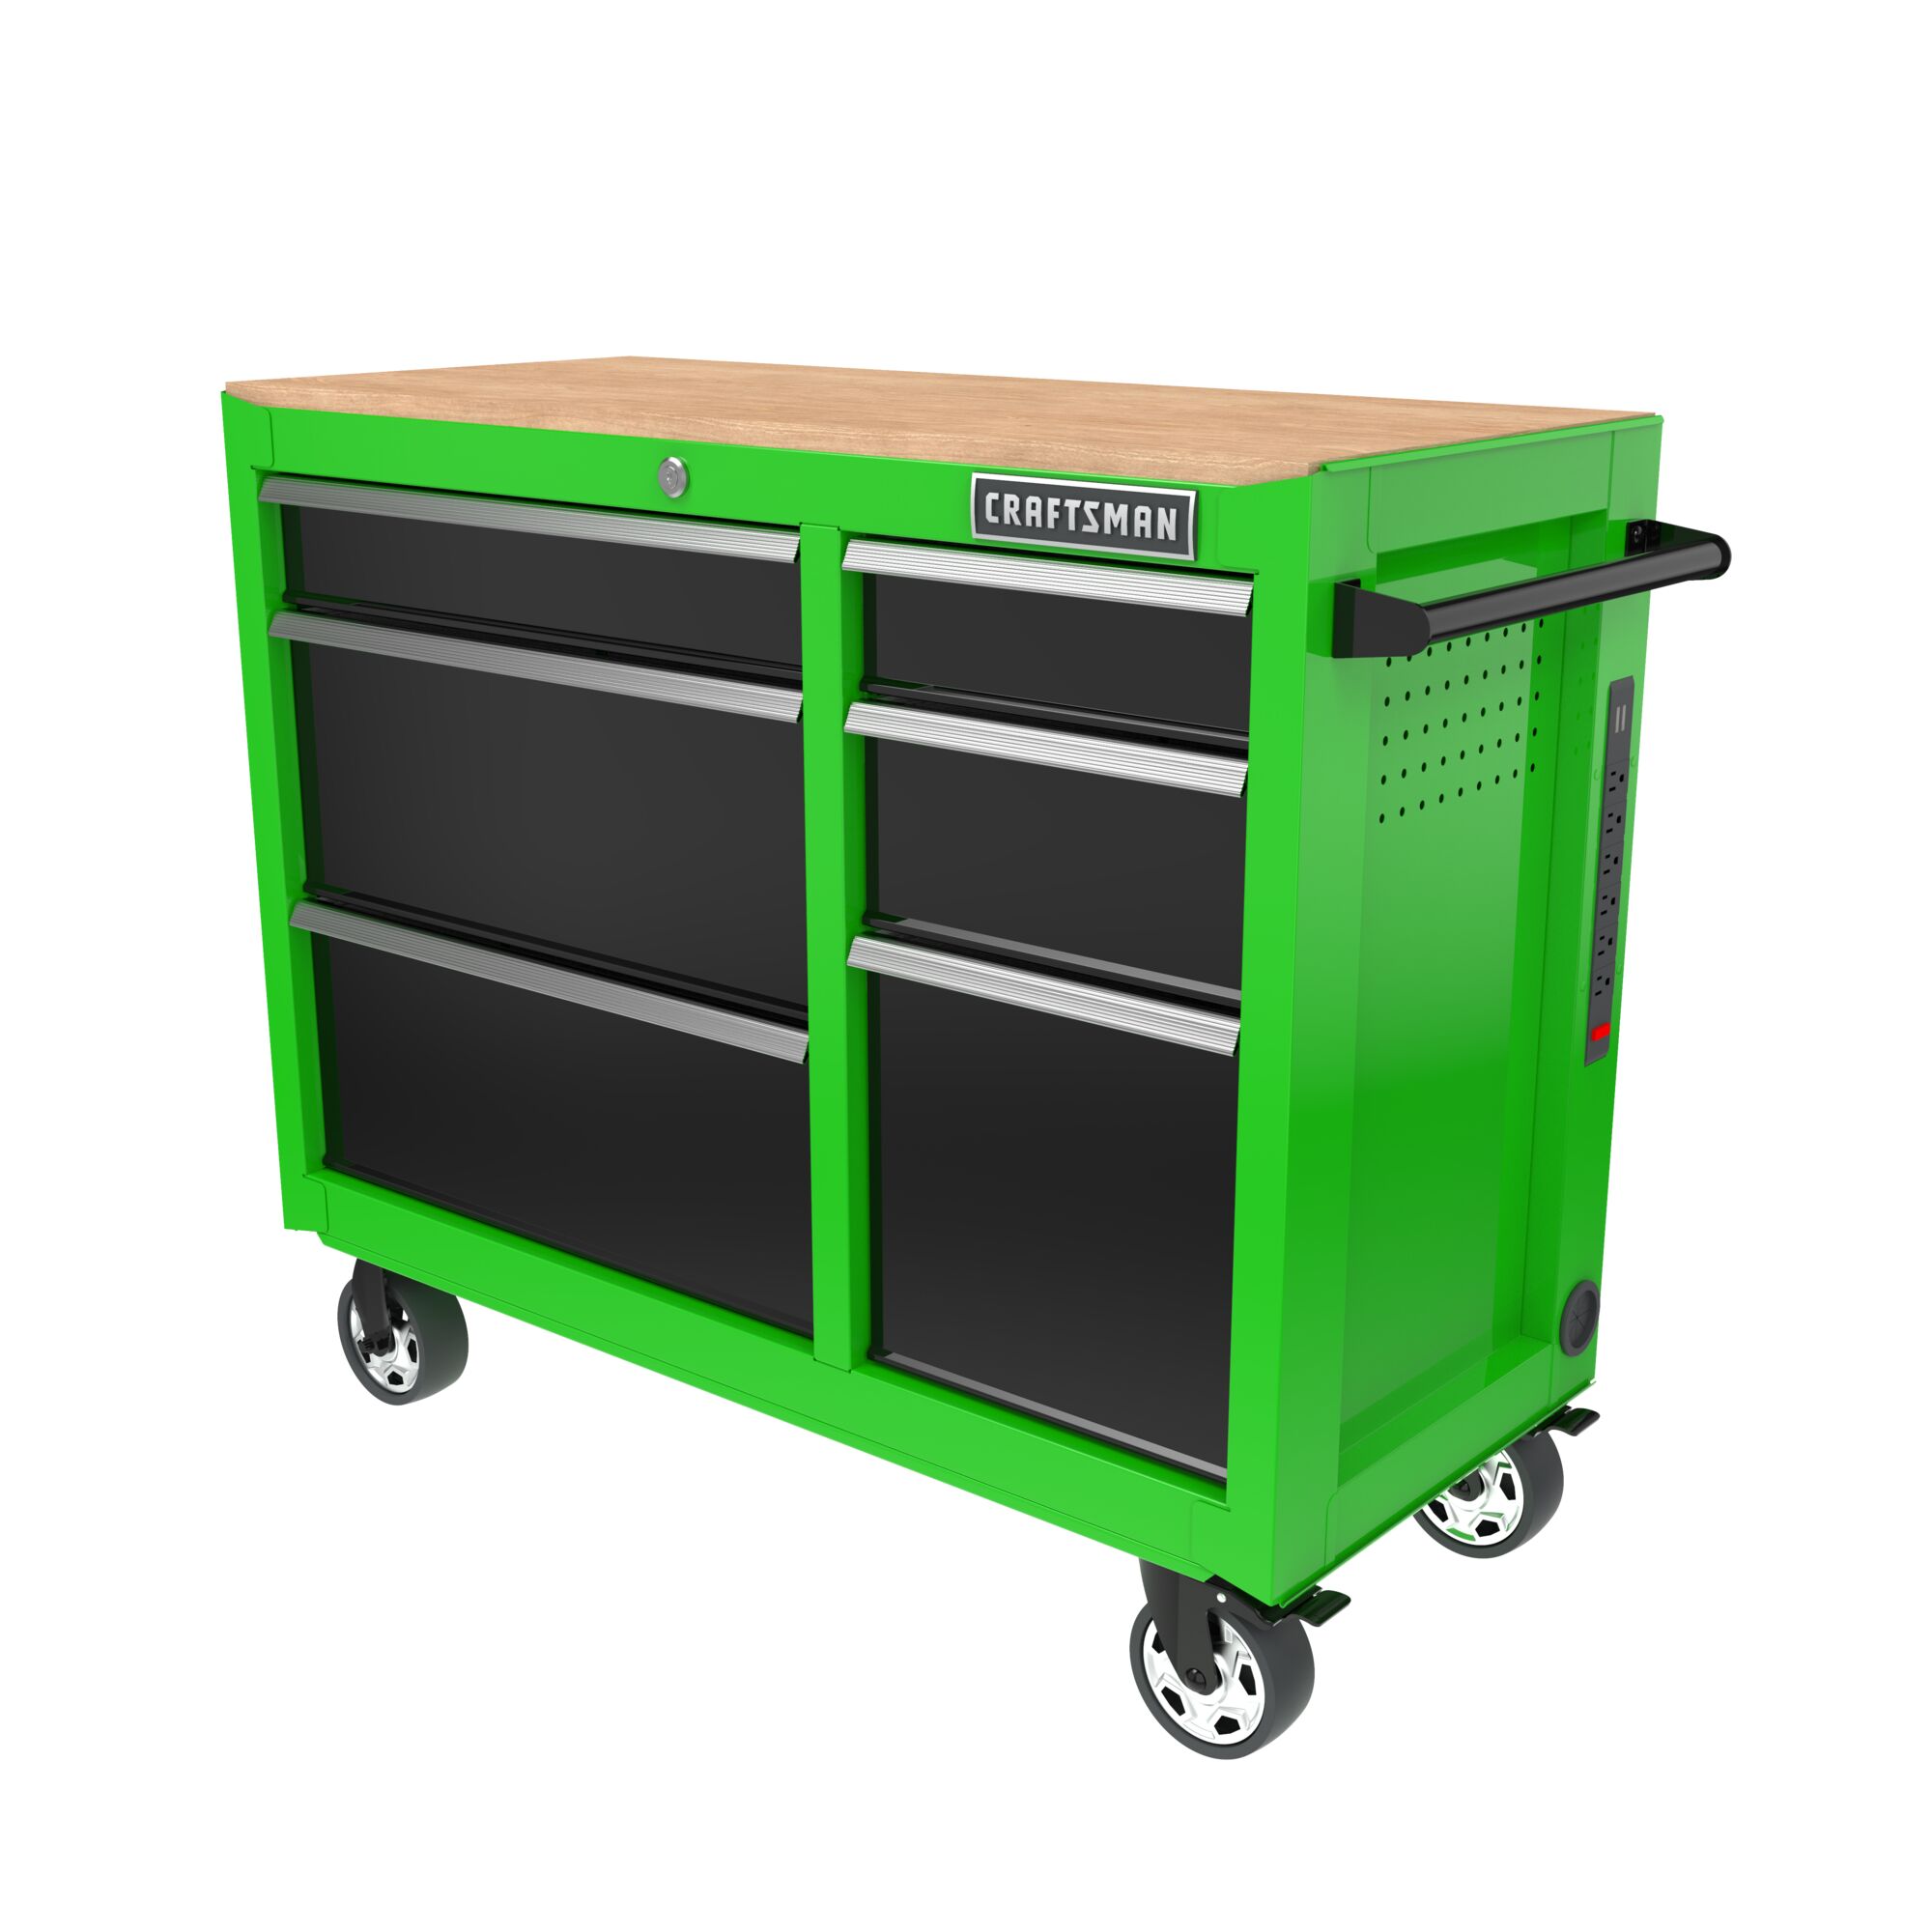 Lime green CRAFTSMAN S2000 Series 41-inch wide 6-drawer workstation with black drawers and wood top, at 3/4 turn to left